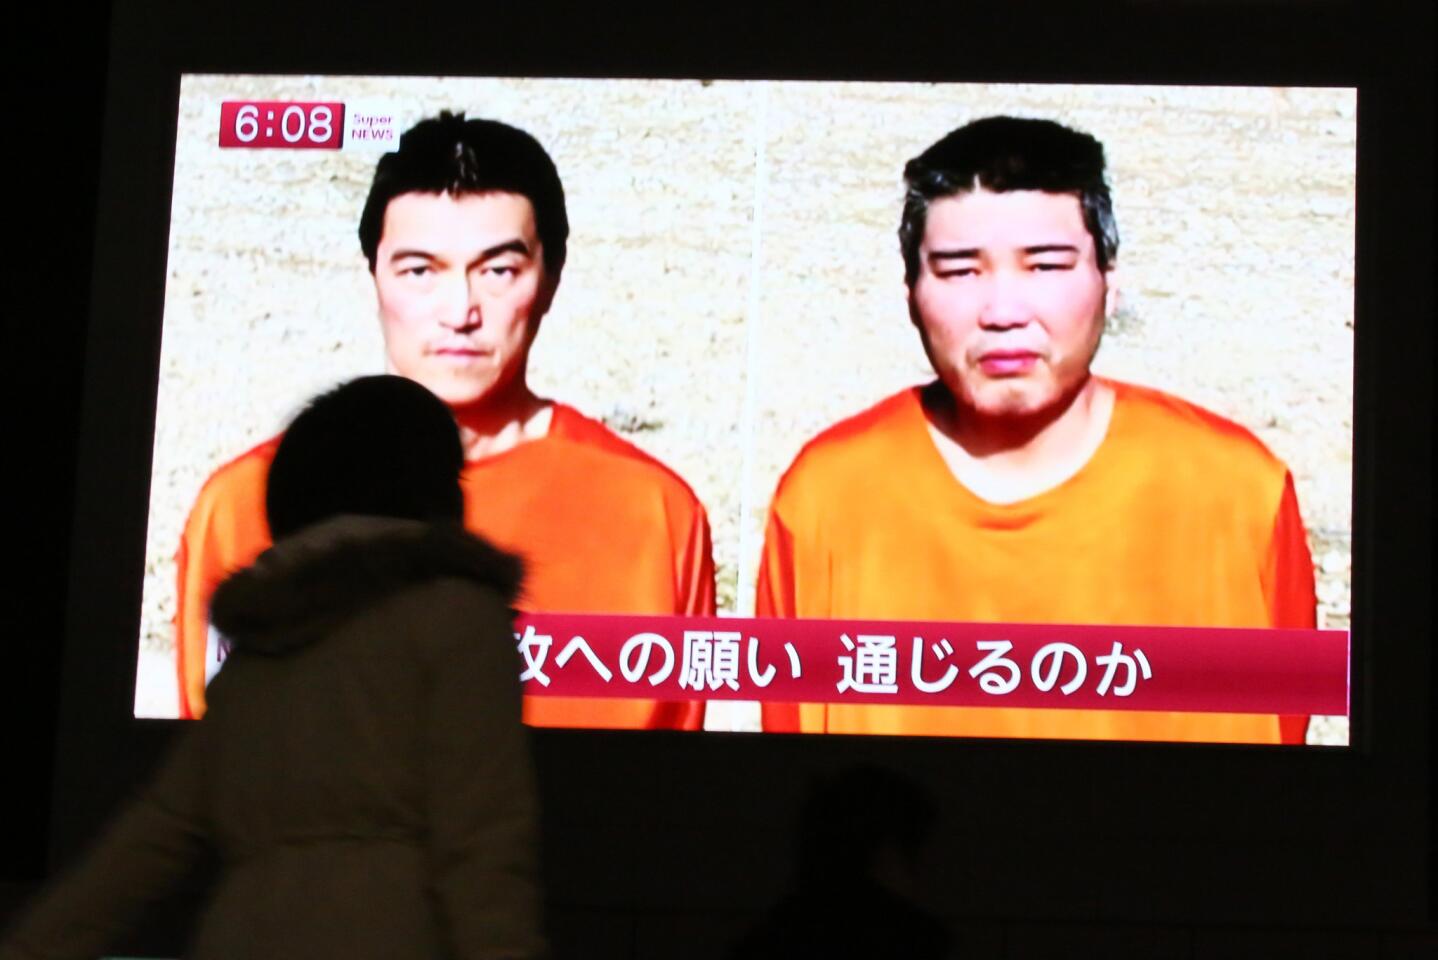 A Tokyo passerby watches a Jan 23 TV news program reporting on two Japanese hostages, Kenji Goto, left, and Haruna Yukawa, held by Islamic State.